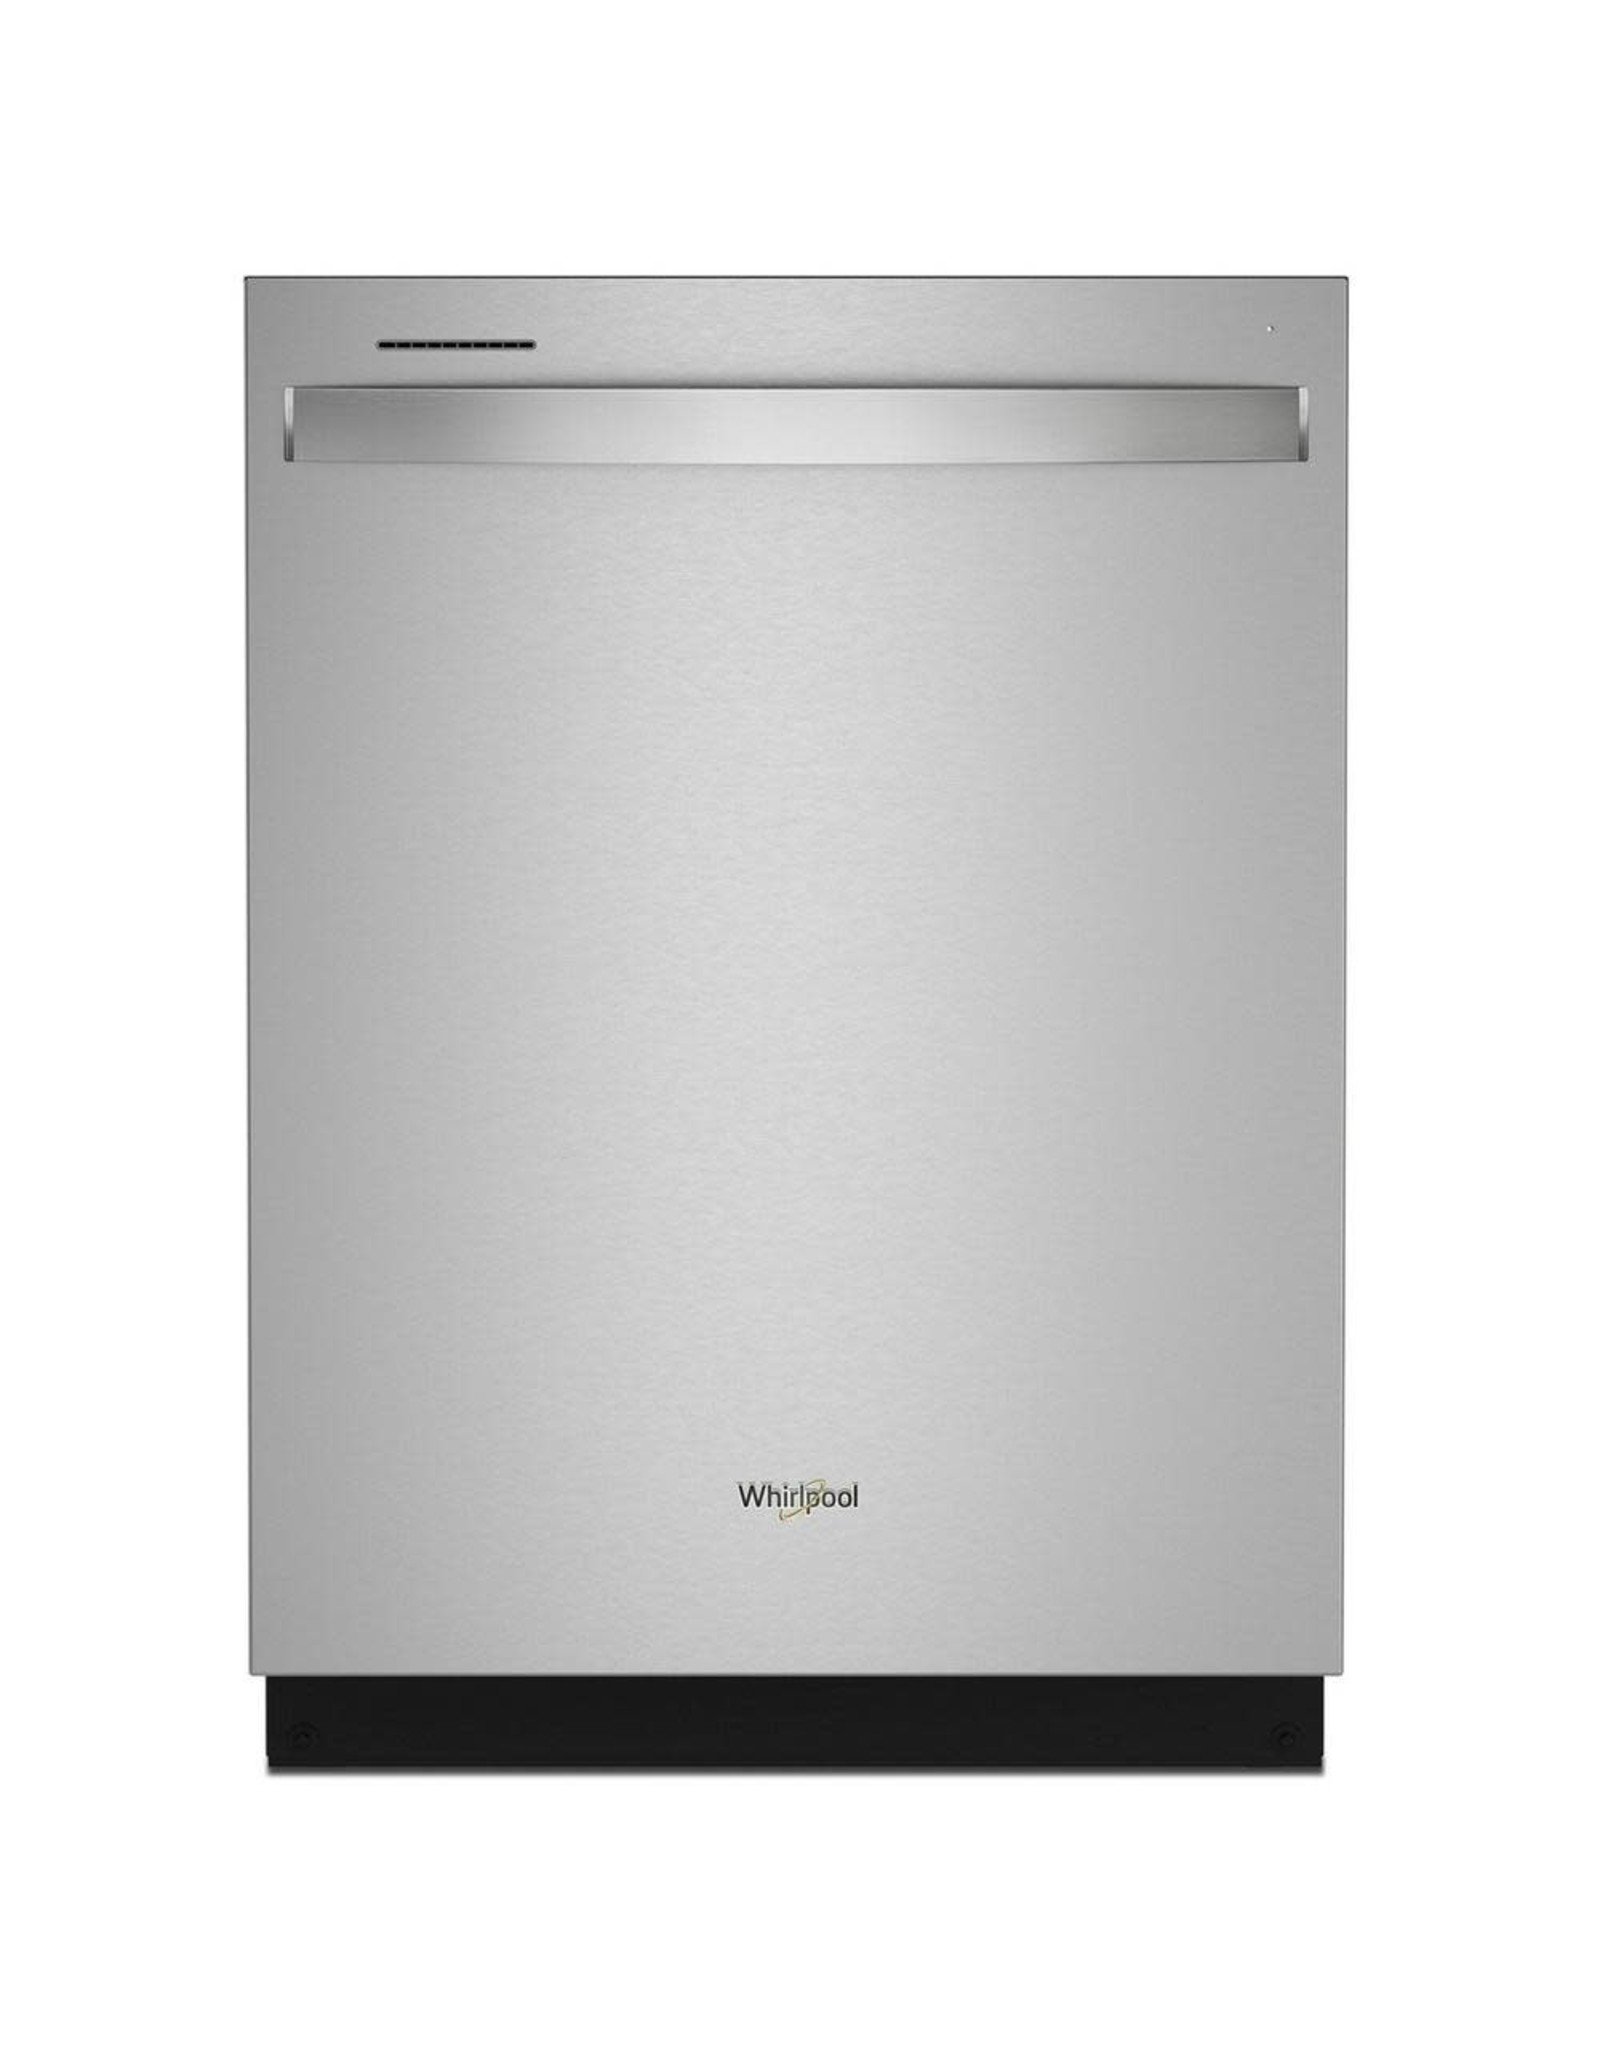 WHIRLPOOL WDT750SAKZ 24 in. Top Control Built-In Tall Tub Dishwasher in Fingerprint Resistant Stainless Steel with Third Level Rack